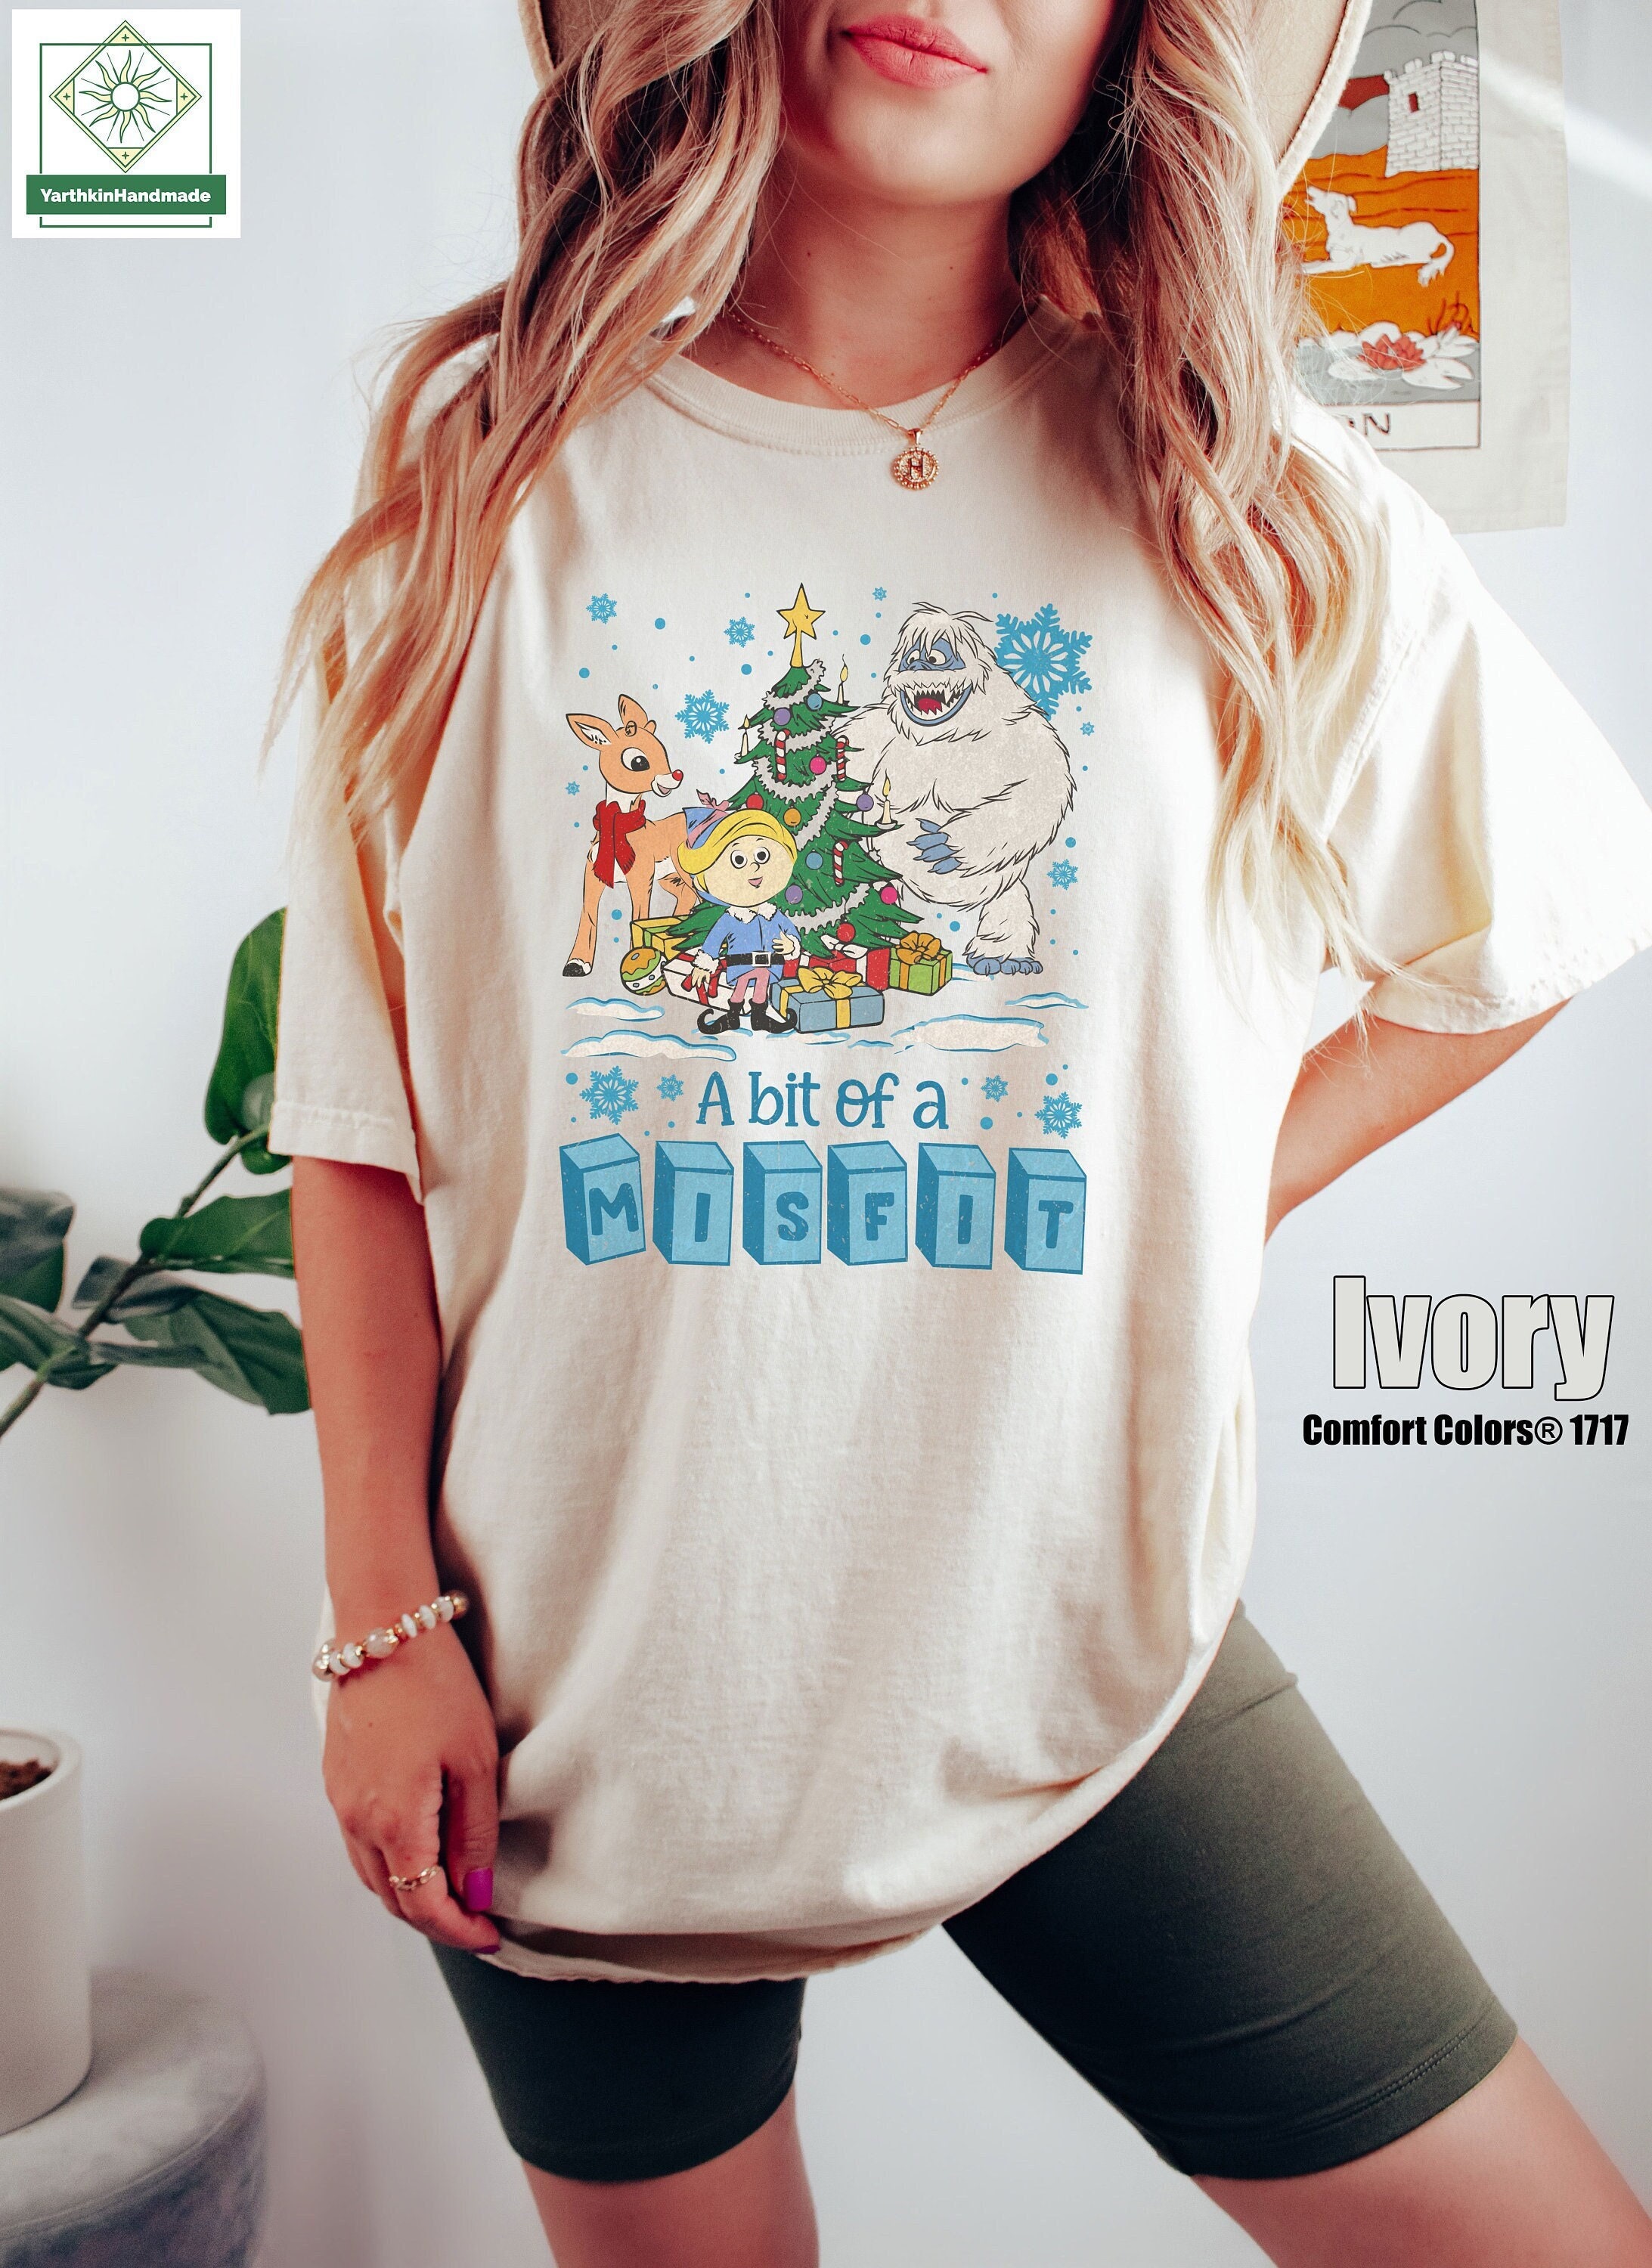 Discover Retro A Bit Of Misfit Shirt, Rudolph The Red-Nosed Reindeer Shirt, Hermey The Misfit Elf, Rudolph Reindeer, Bumble Shirt